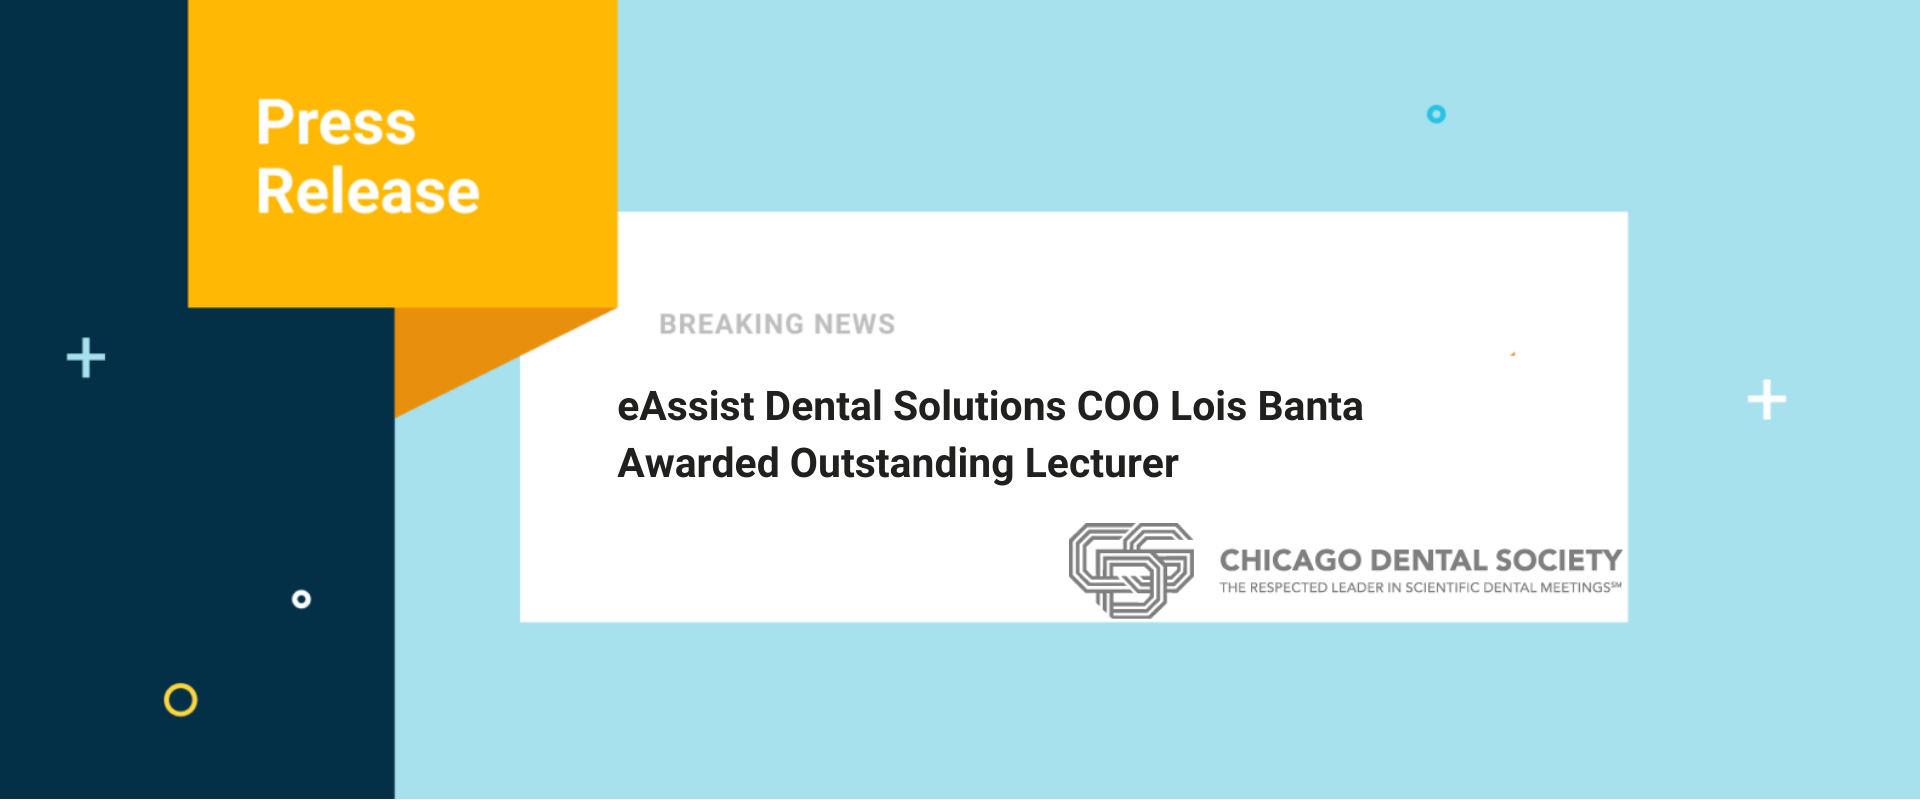 eAssist Dental Solutions COO Lois Banta Awarded Outstanding Lecturer